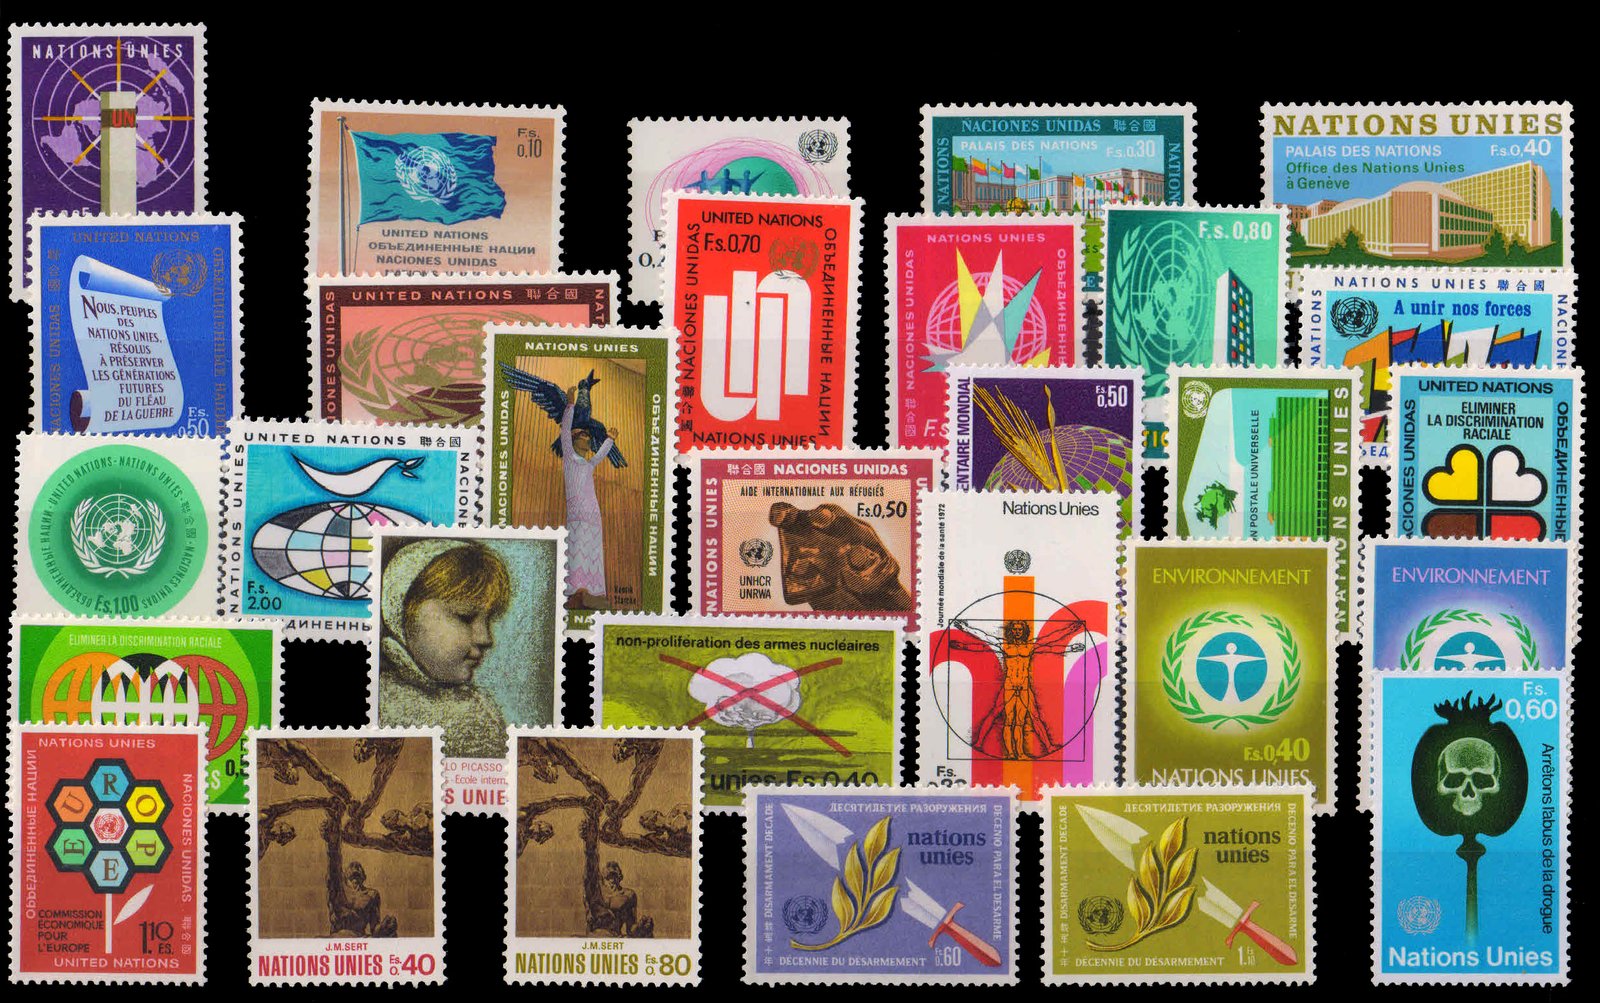 UNITED NATIONS-Geneva Office-58 All Different Stamps-MNH-Mostly Complete Sets-1969 to 1976 Period-Total 63 Stamps Issued-Catalog Value £ 60-